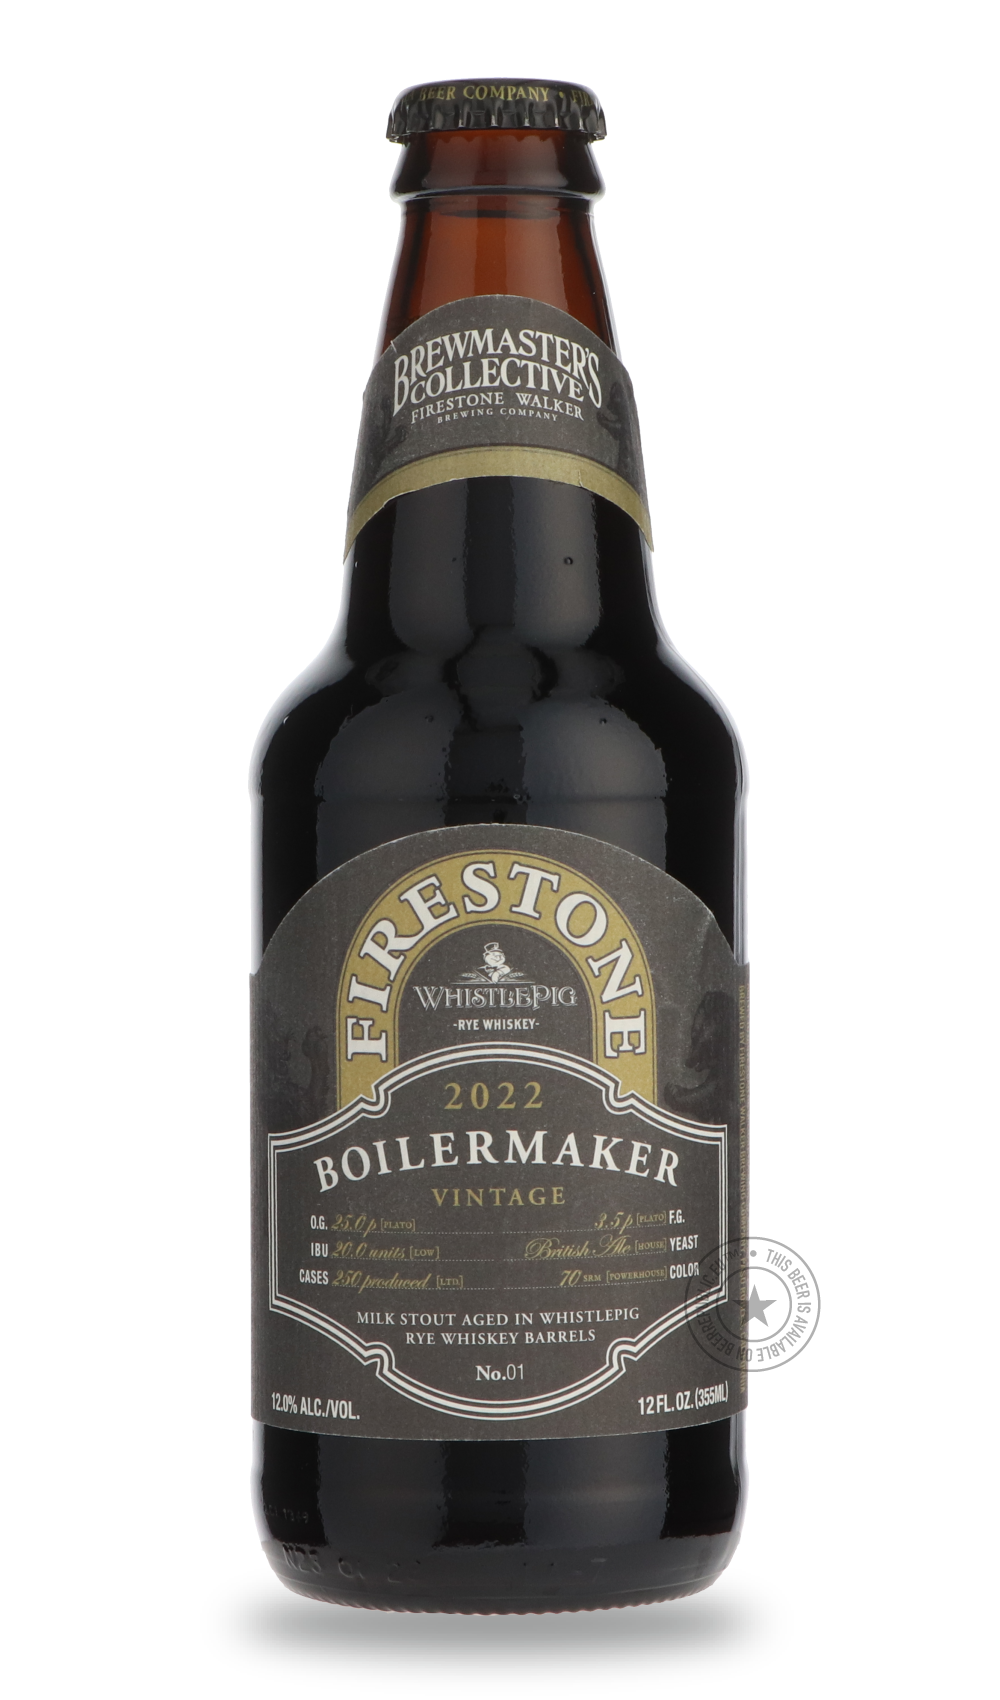 -Firestone Walker- Boilermaker-Stout & Porter- Only @ Beer Republic - The best online beer store for American & Canadian craft beer - Buy beer online from the USA and Canada - Bier online kopen - Amerikaans bier kopen - Craft beer store - Craft beer kopen - Amerikanisch bier kaufen - Bier online kaufen - Acheter biere online - IPA - Stout - Porter - New England IPA - Hazy IPA - Imperial Stout - Barrel Aged - Barrel Aged Imperial Stout - Brown - Dark beer - Blond - Blonde - Pilsner - Lager - Wheat - Weizen -